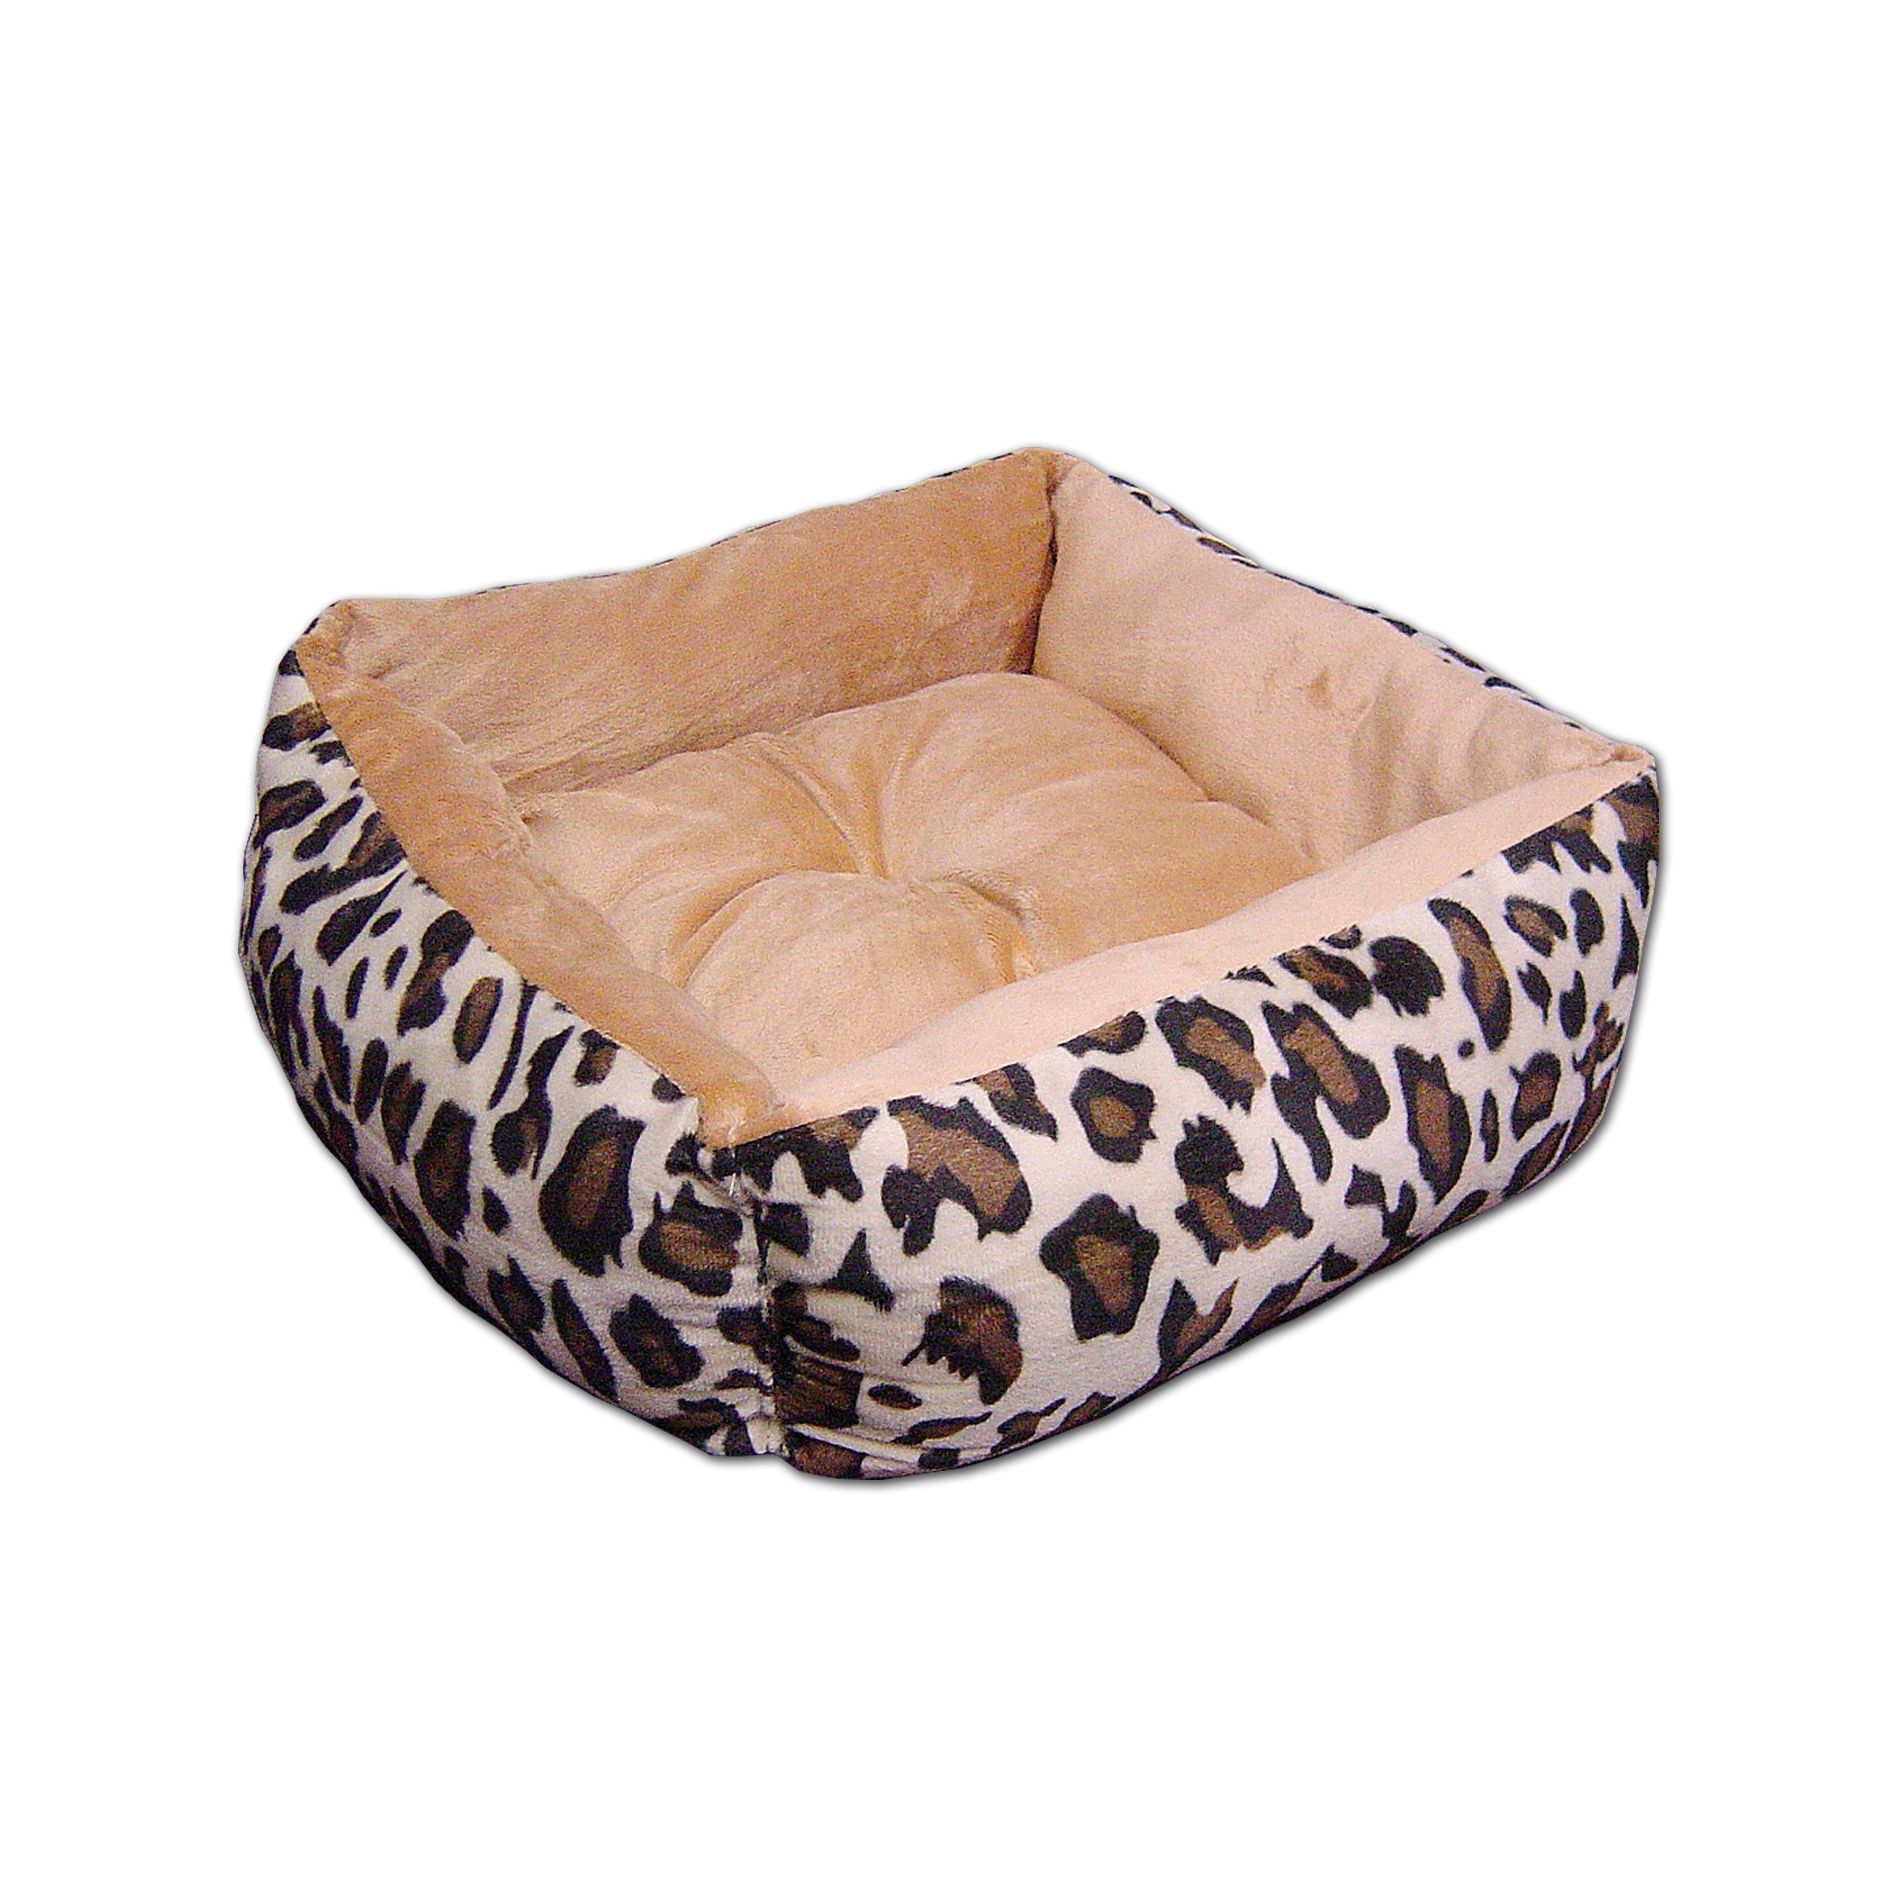 Extra Extra Small Soft Plush Flip Leopard Pet Bed